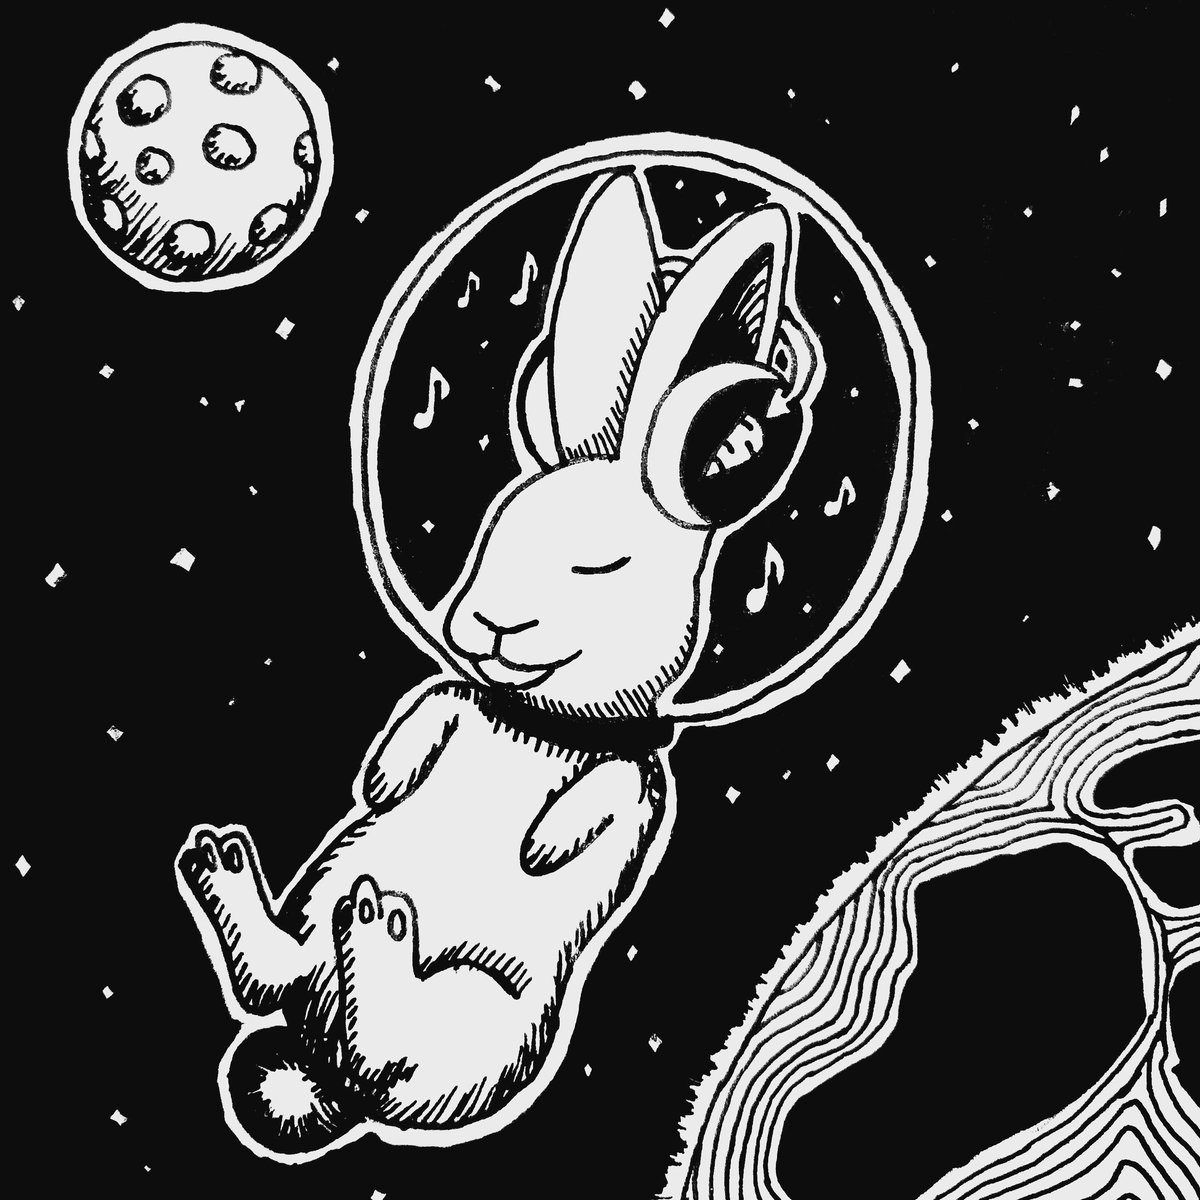 #Emojitober 7 — 🌌🐇🎶

Talk is overrated, let's just vibe~

#emojitober2020 #drawtober2020 #drawtober #inkpenart #inkpendrawing #spaceart #musicislife